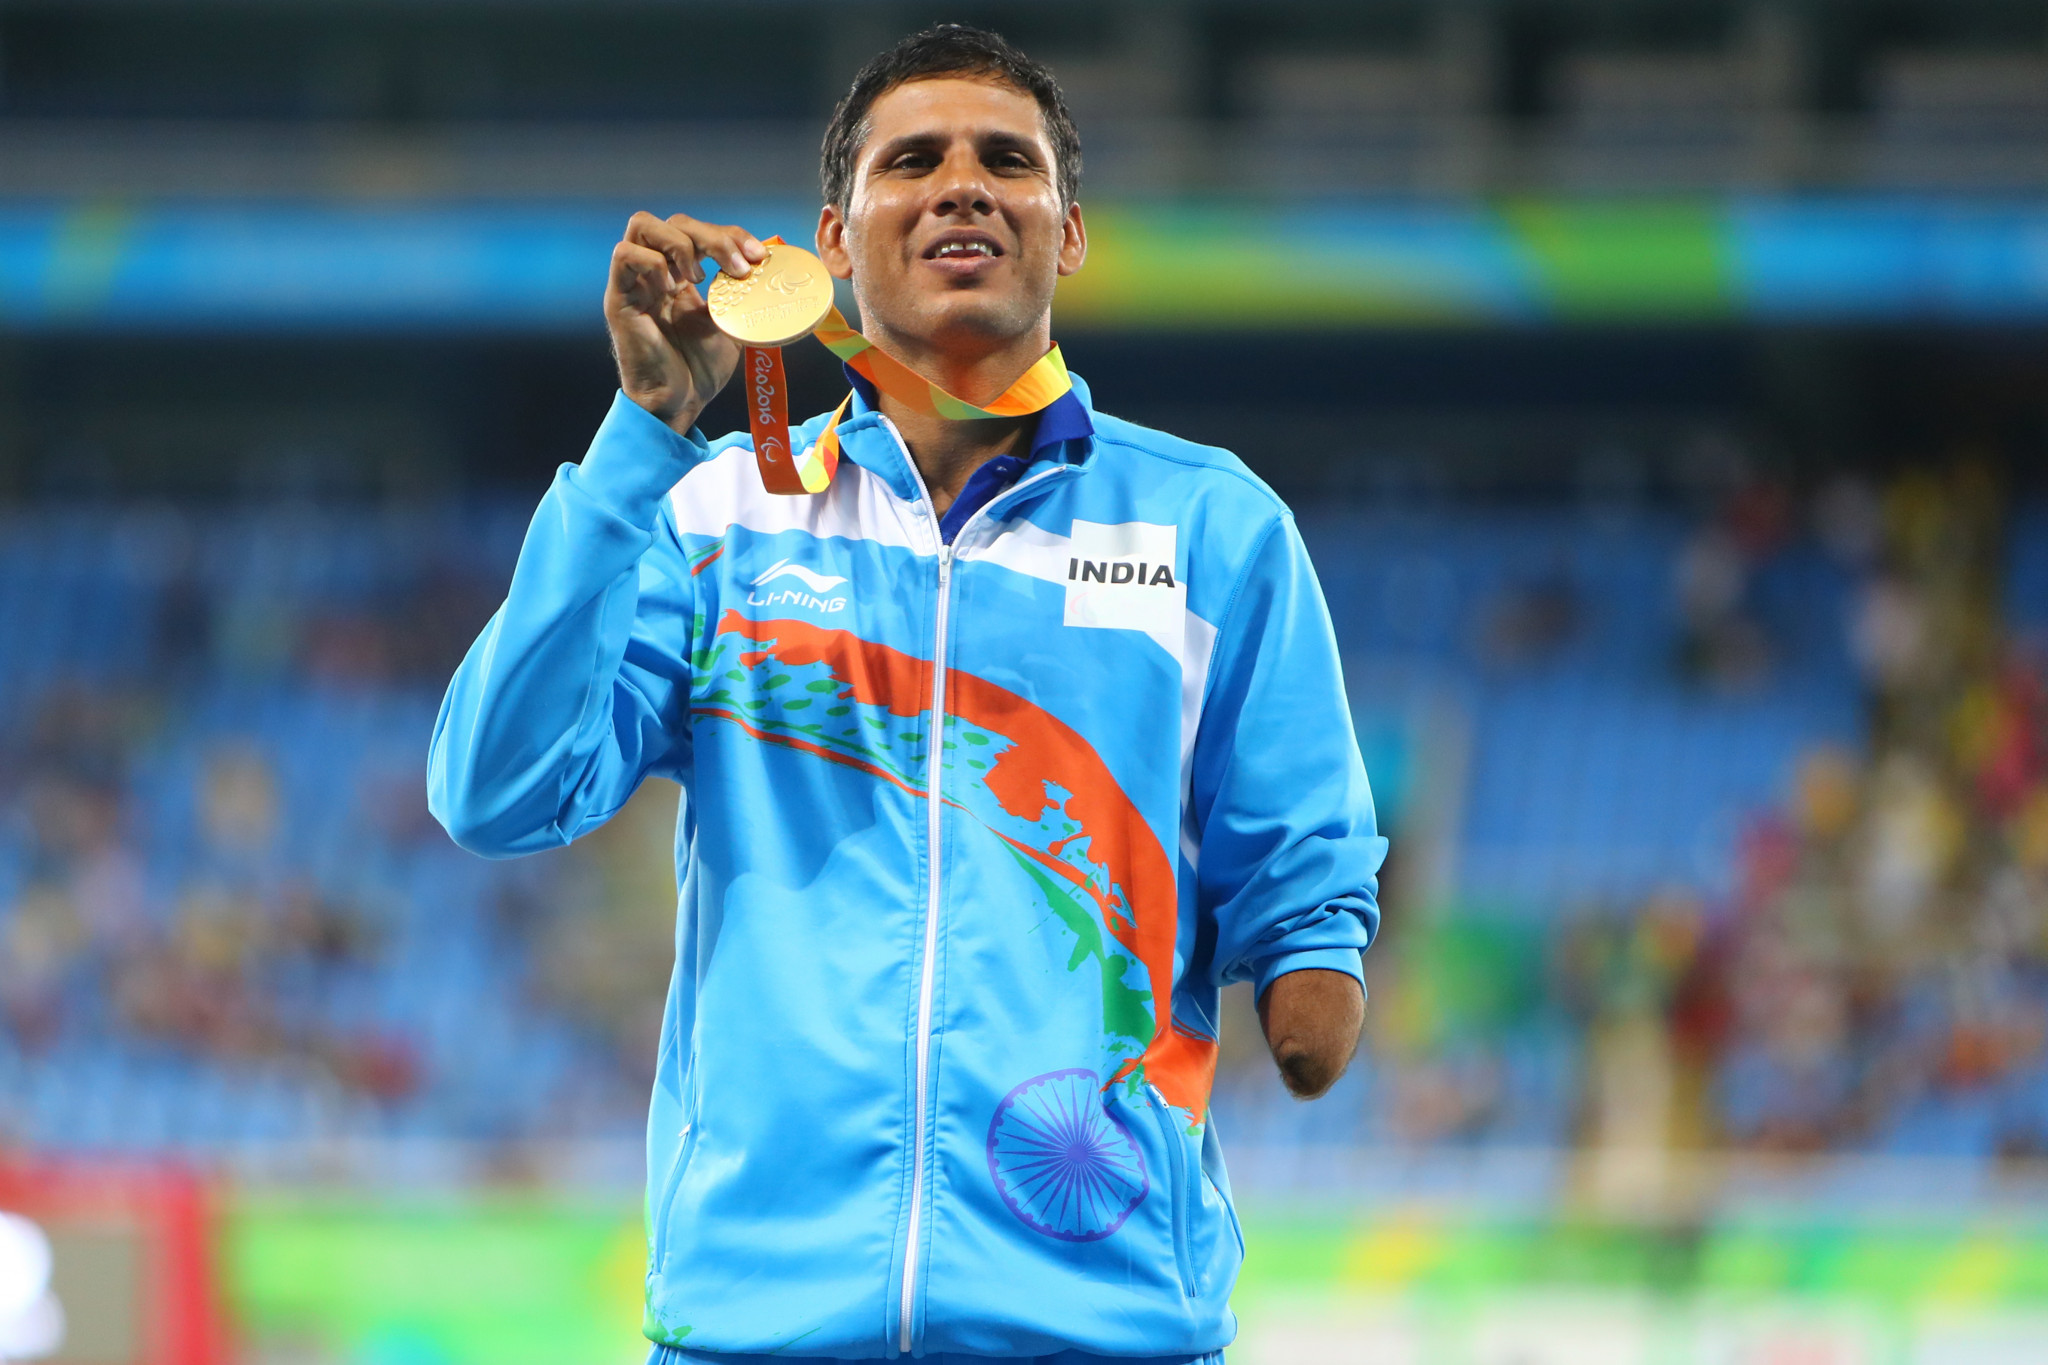 Devendra Jhajharia of India poses on the podium at the Rio 2016 Paralympic Games after winning the men's F46 javelin gold medal ©Getty Images